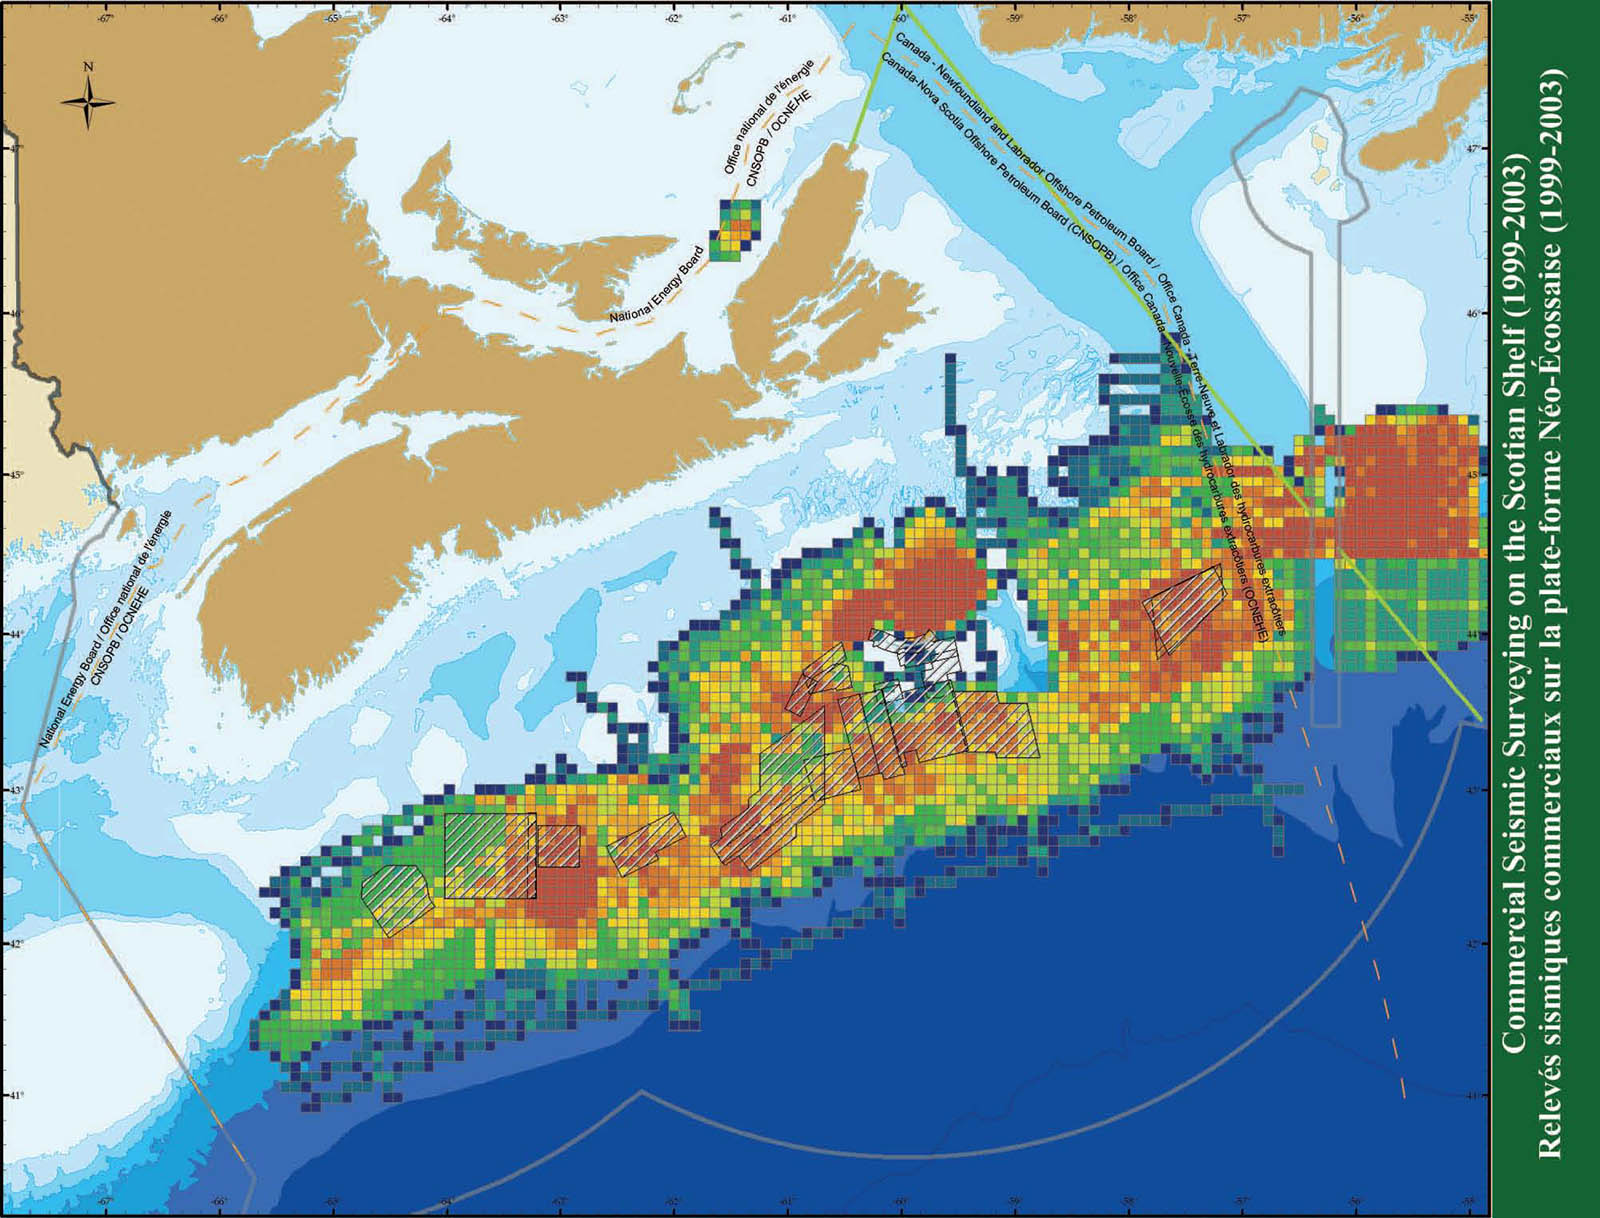 Commercial seismic surveying on the Scotian Shelf (1999-2003)